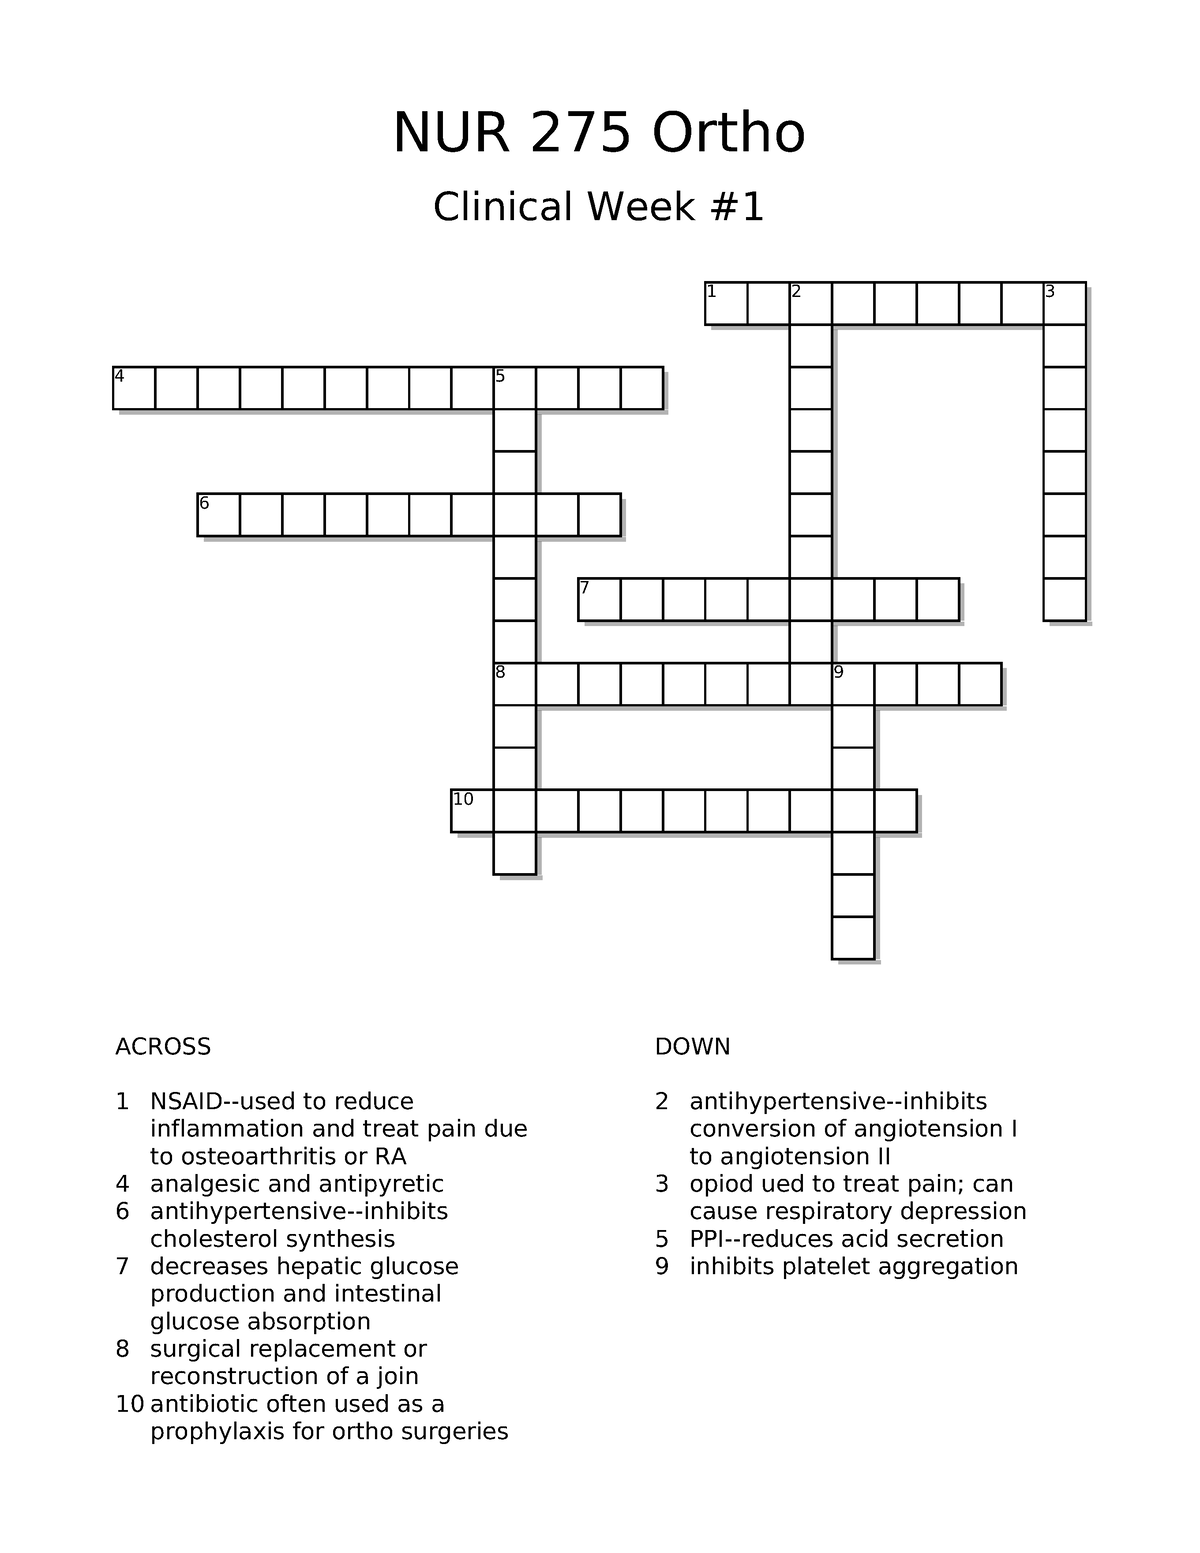 Ortho crossword puzzle NUR 275 Ortho Clinical Week ACROSS 1 NSAID